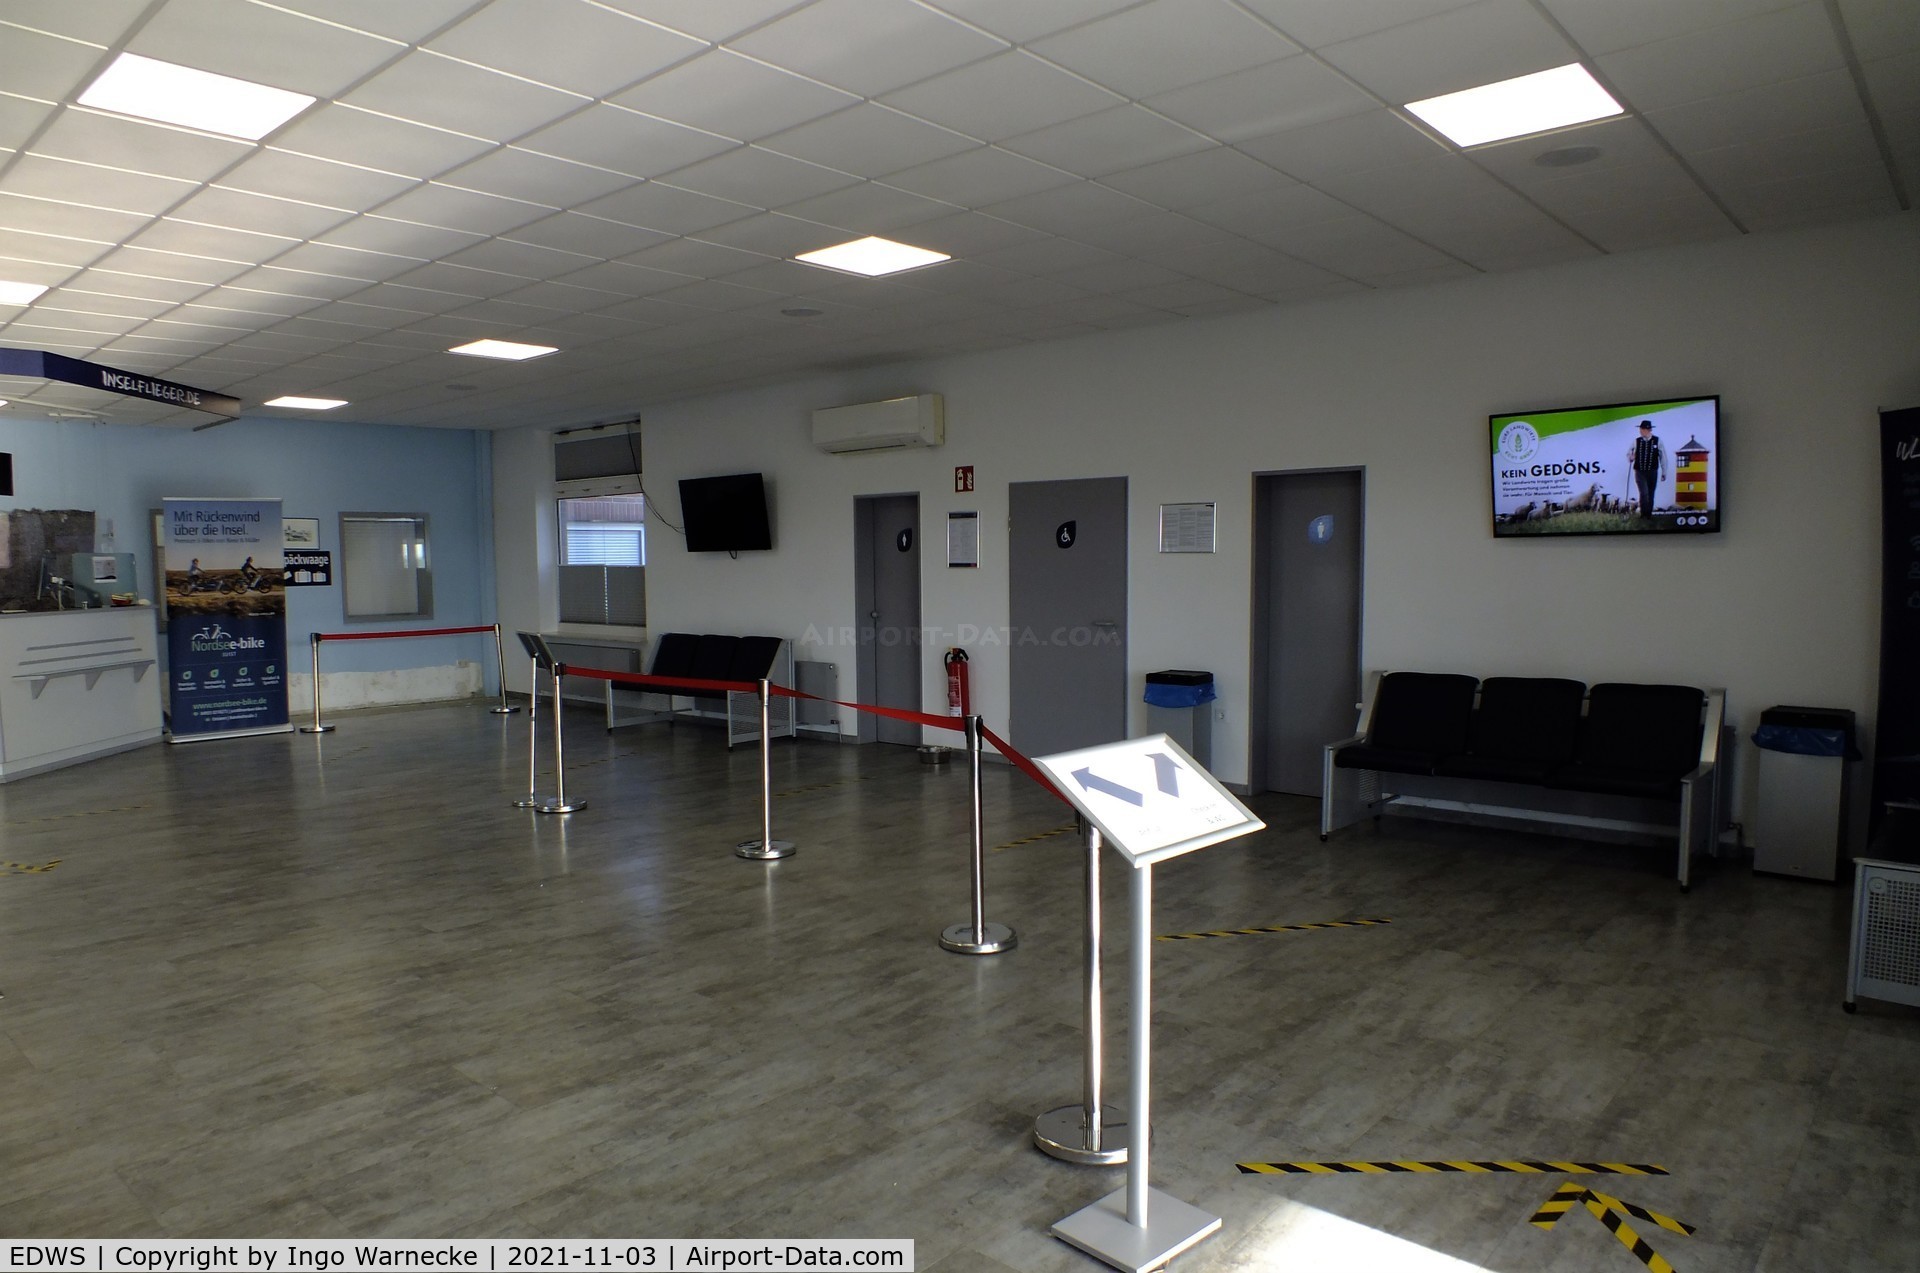 EDWS Airport - inside the terminal at Norden-Norddeich airfield